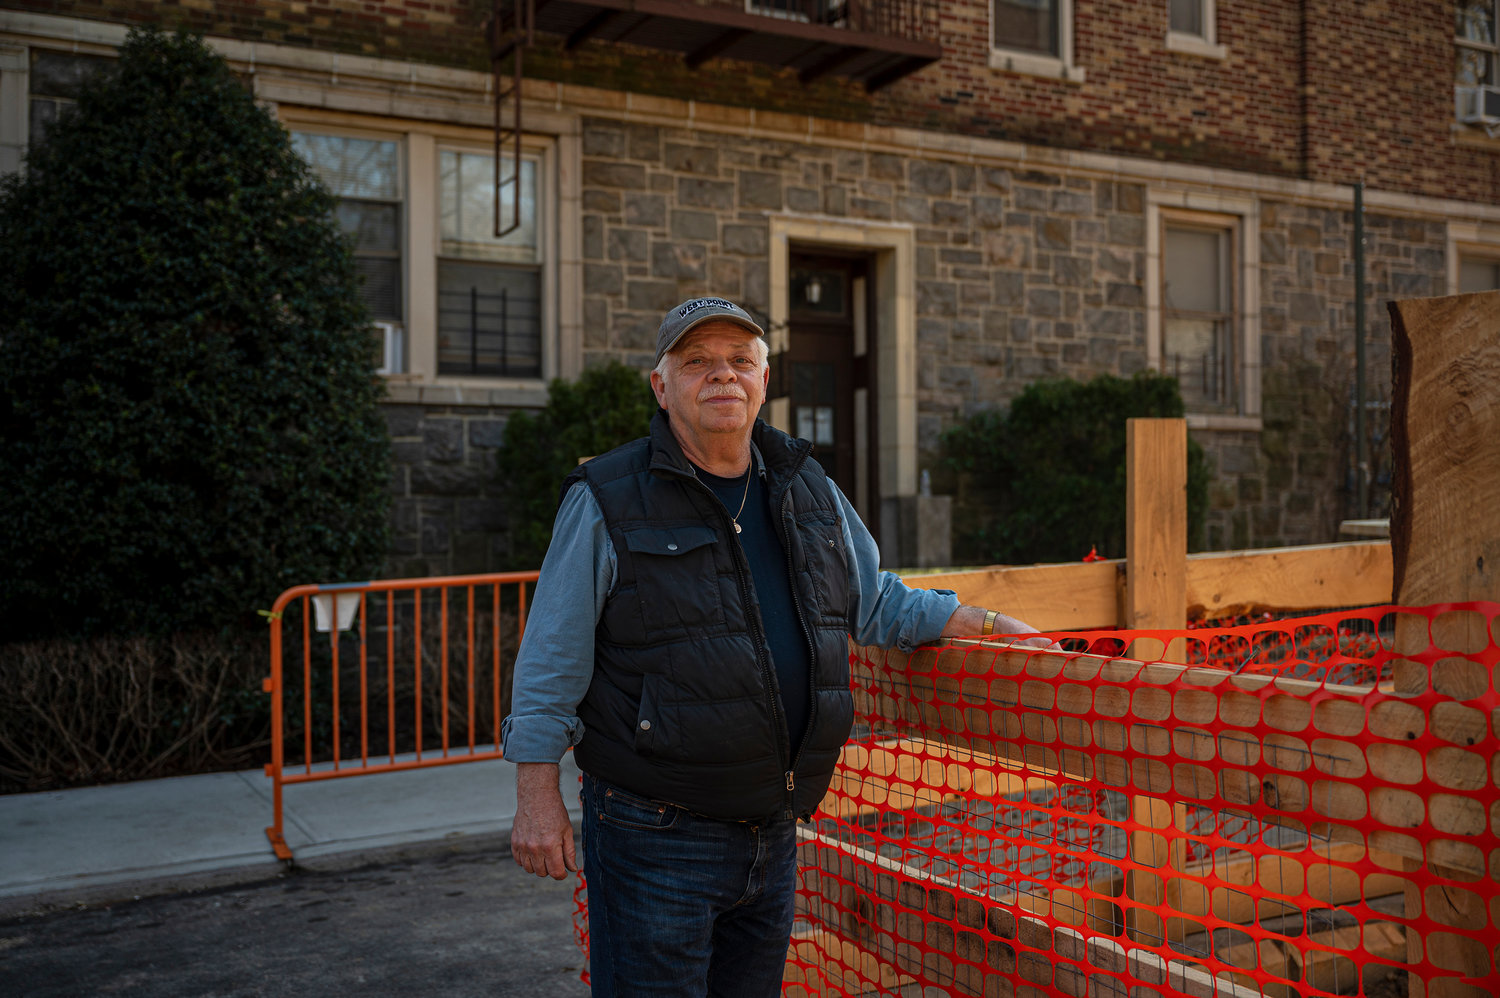 Gary Oliver has lived in Greystone Manor in Fieldston for more than 30 years — much of that time as a super. Oliver is concerned about how neighboring construction dating back to August has affected the quality of life in his community.